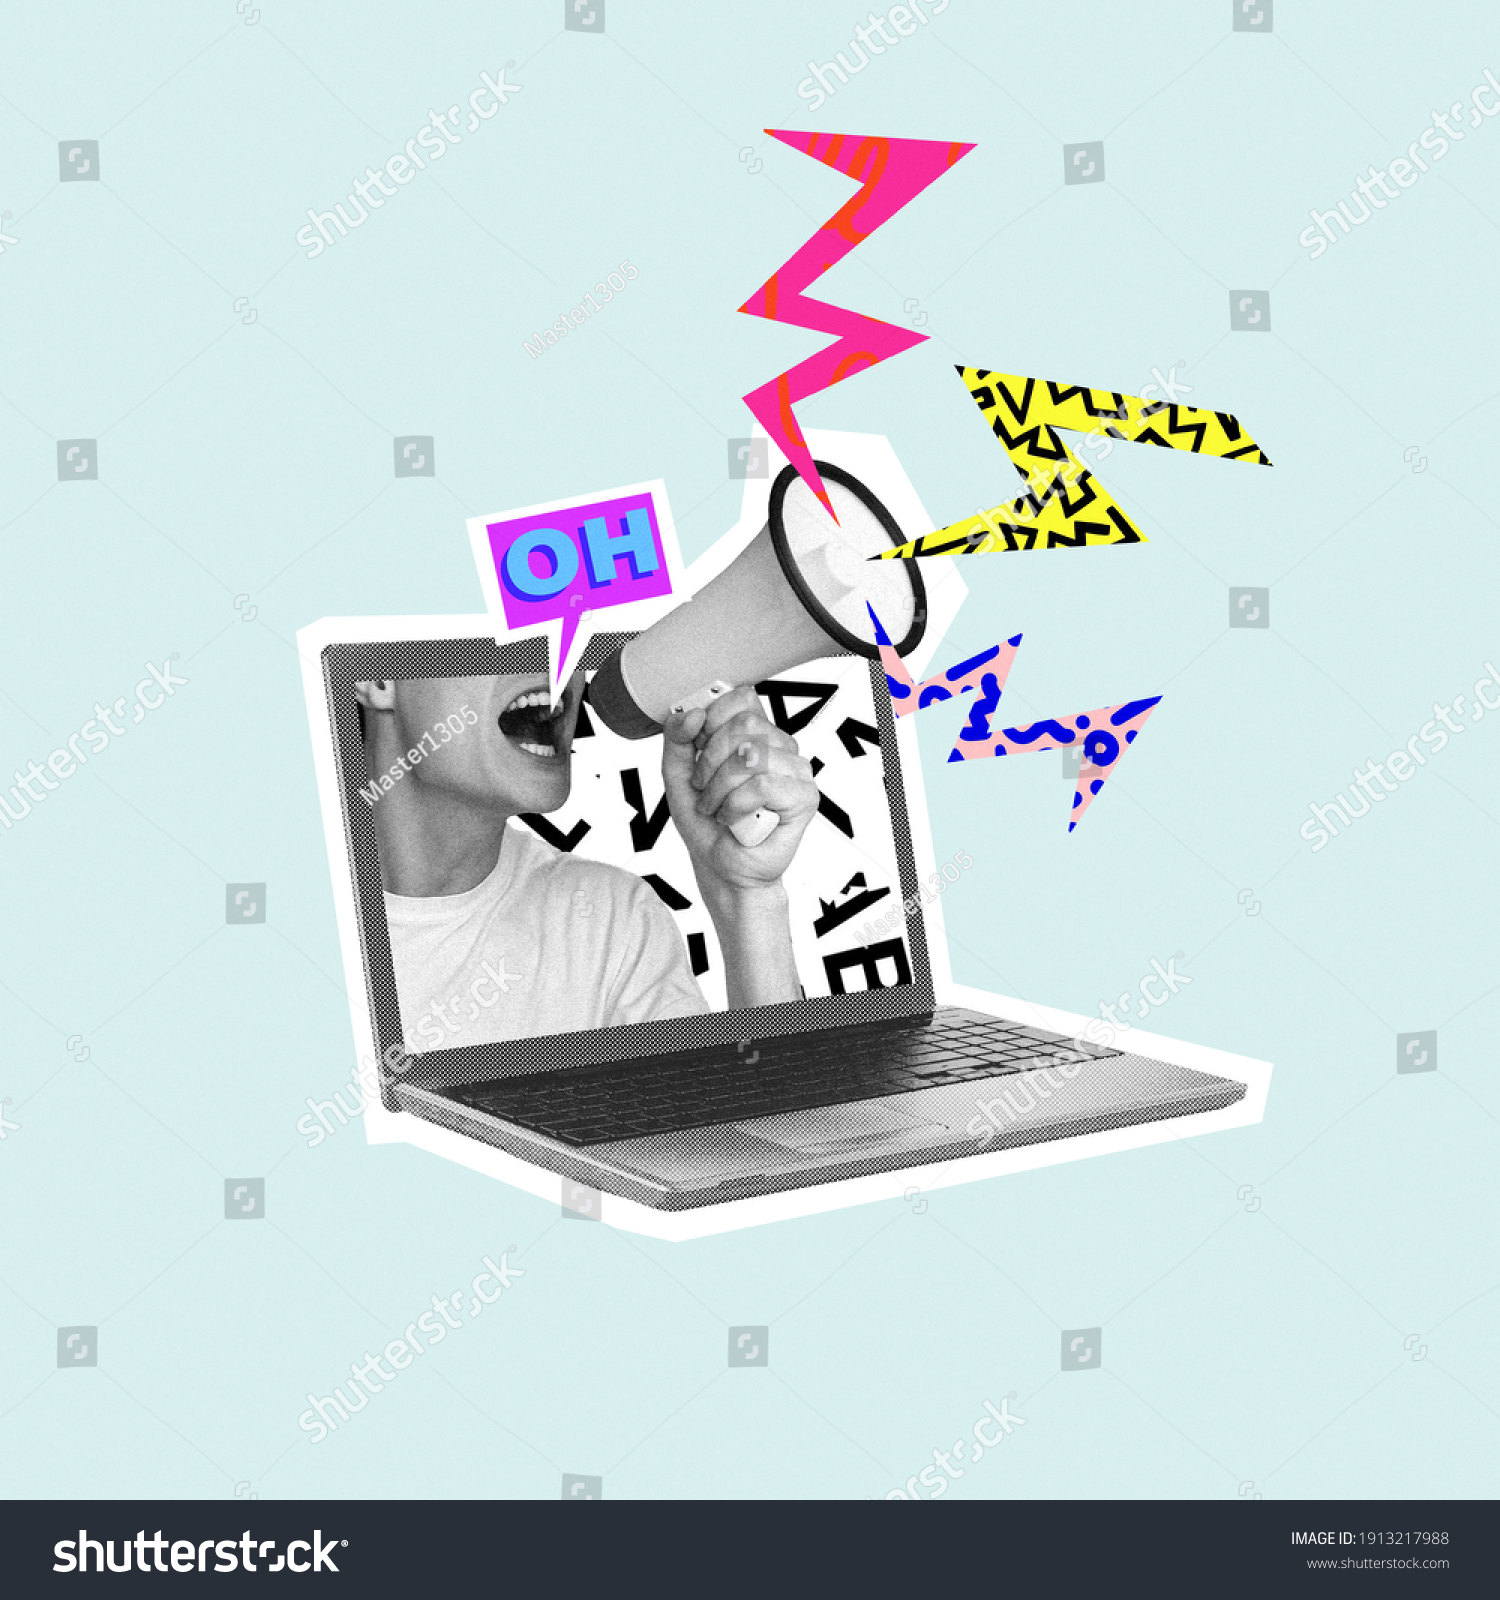 Shouting out your own thoughts online. Man with megaphone in laptop. Modern design, contemporary art collage. Inspiration, idea, trendy urban magazine style. Negative space to insert your text or ad. #1913217988